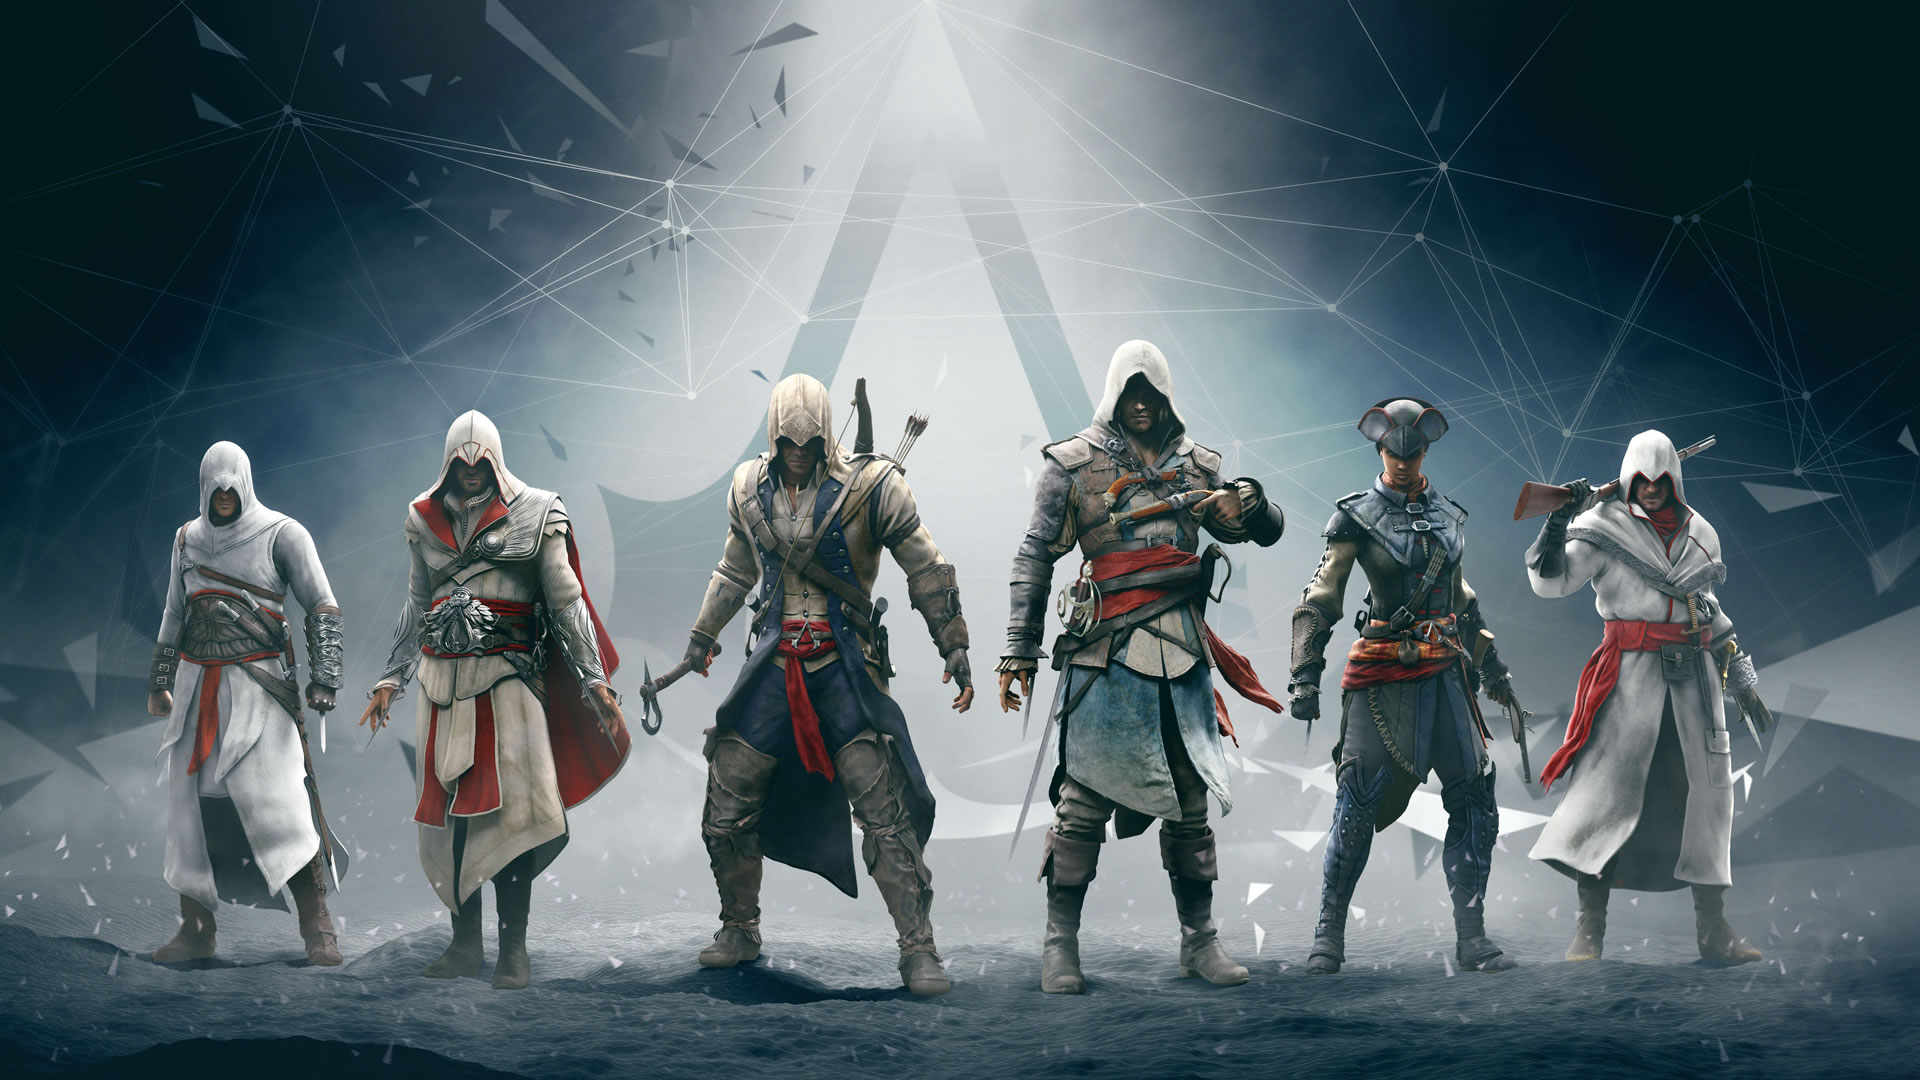 Altair Assassin 039 S Creed Connor Assassin 039 S Creed Edward Kenway Ezio Assassin 039 S Creed 1920x1080